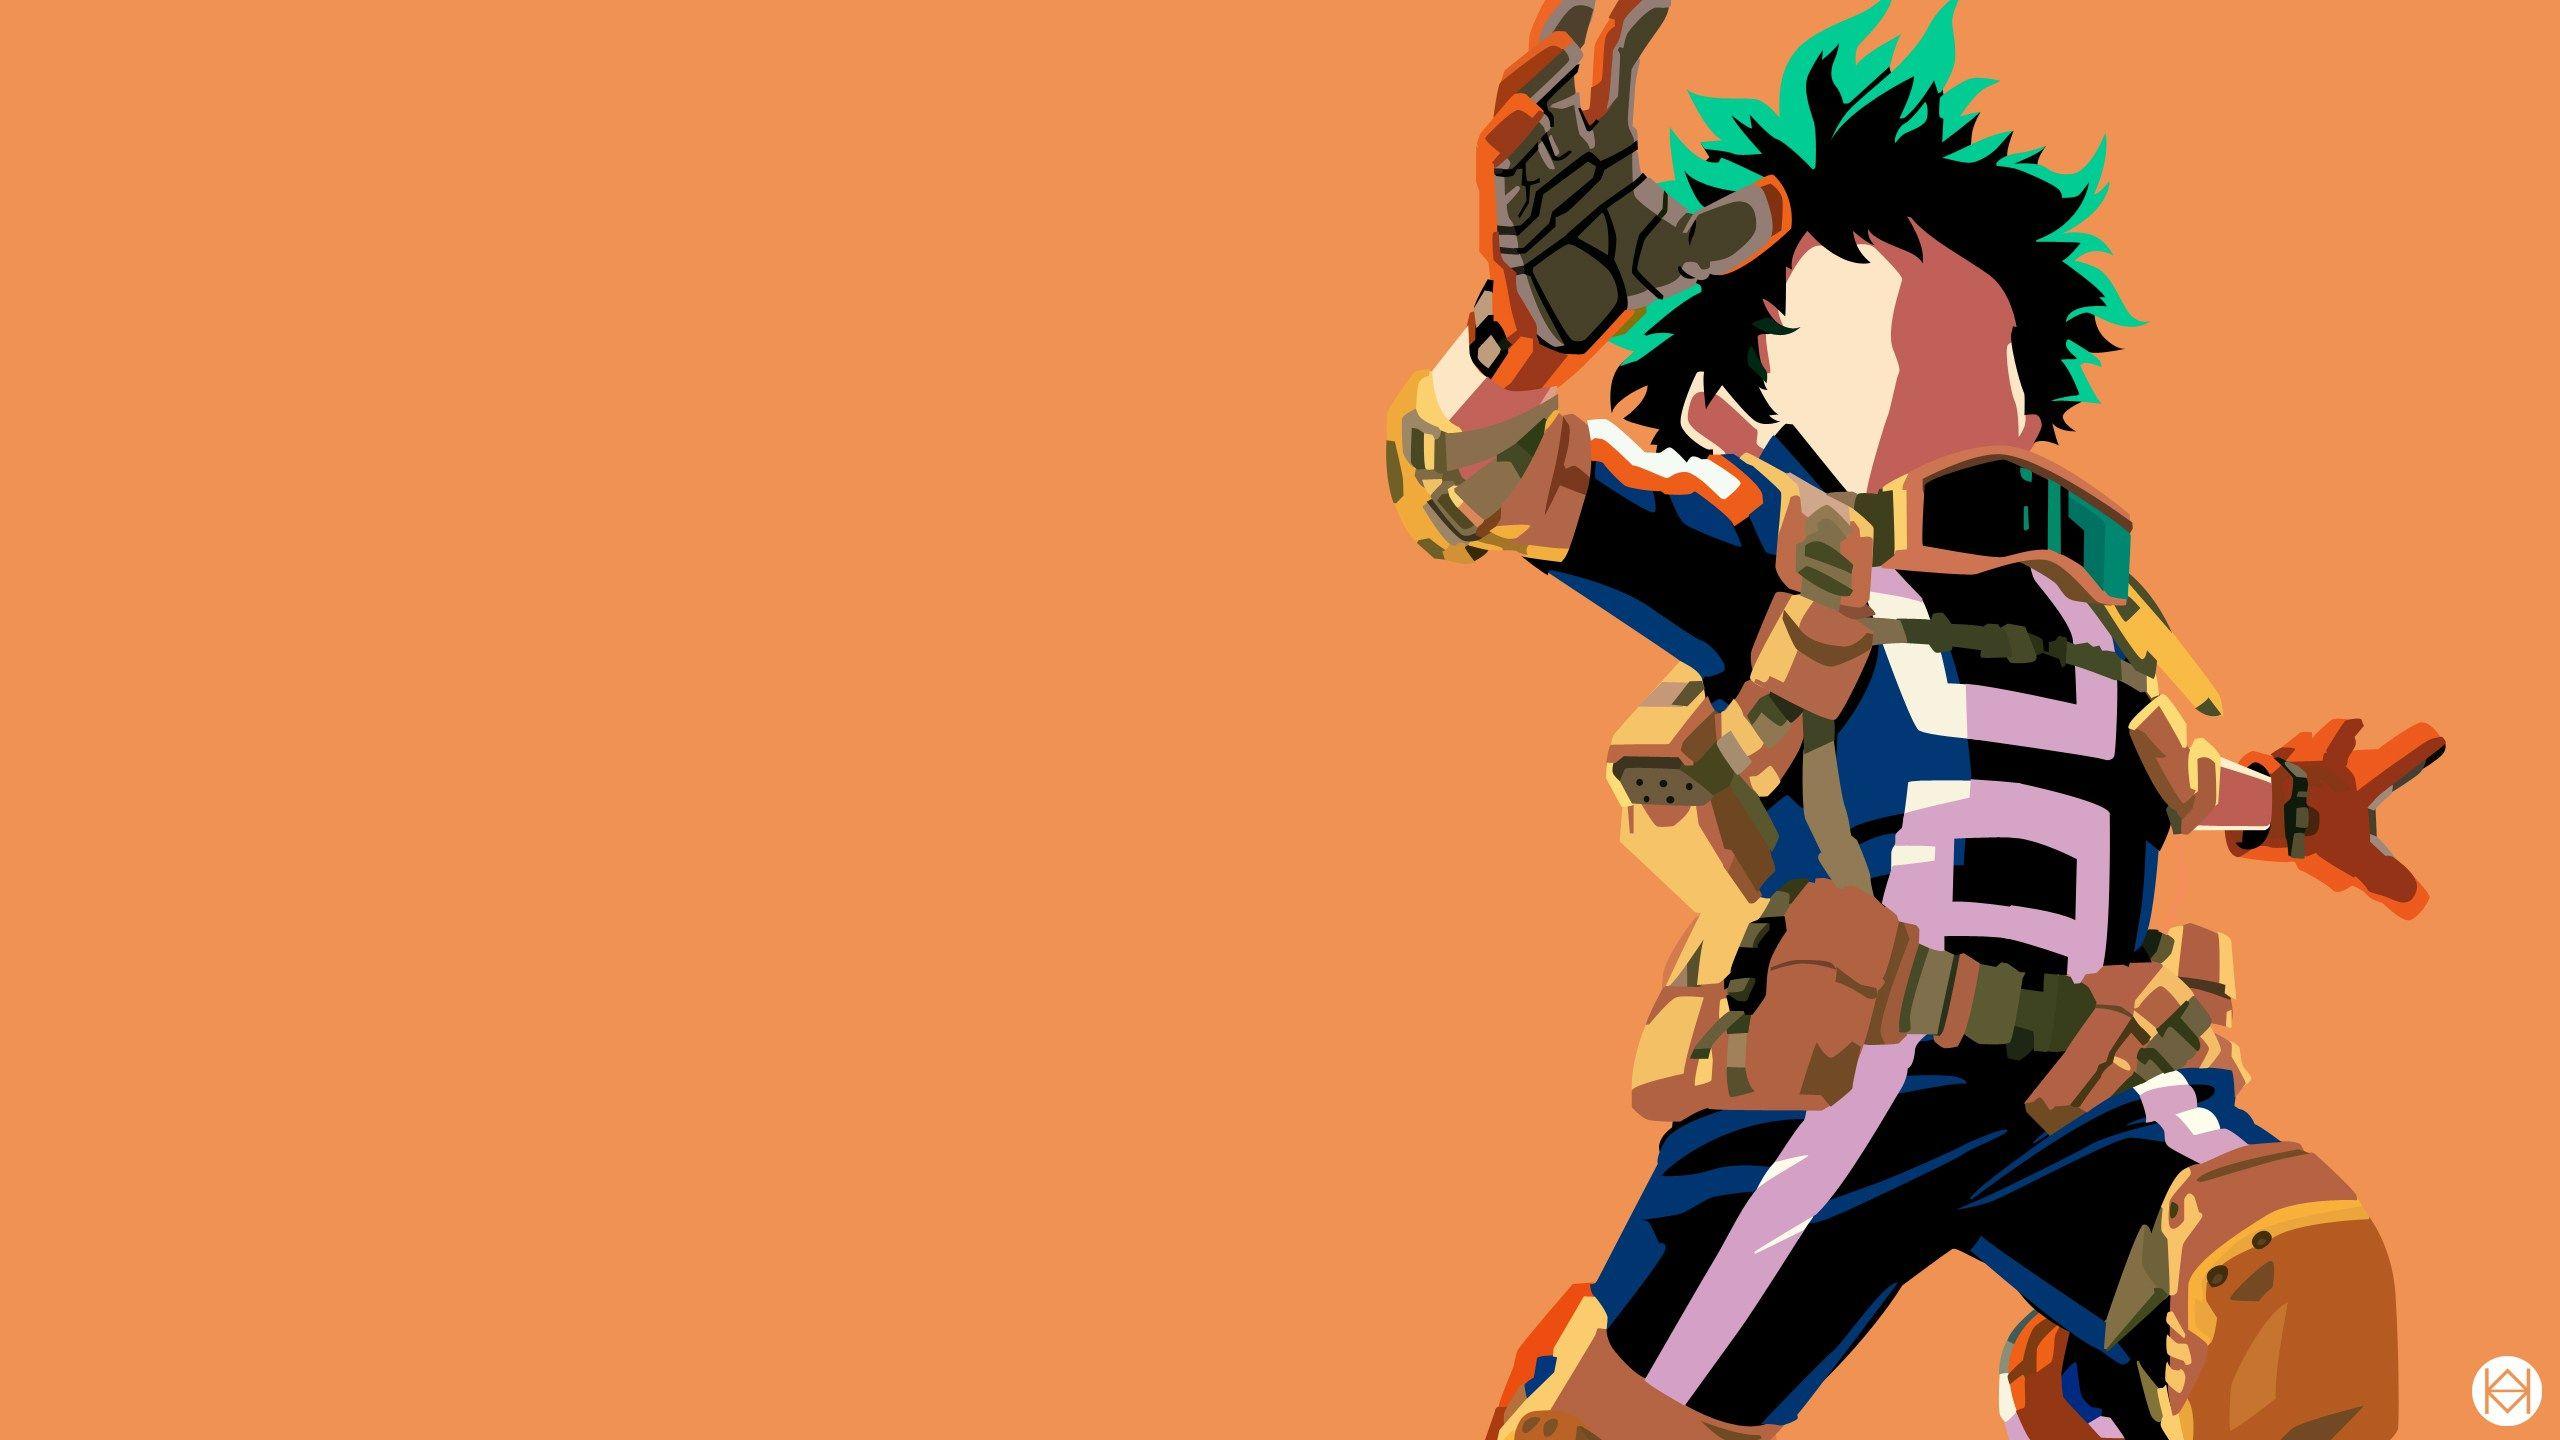 Check out more awesome minimalist wallpapers at My Hero Academia.